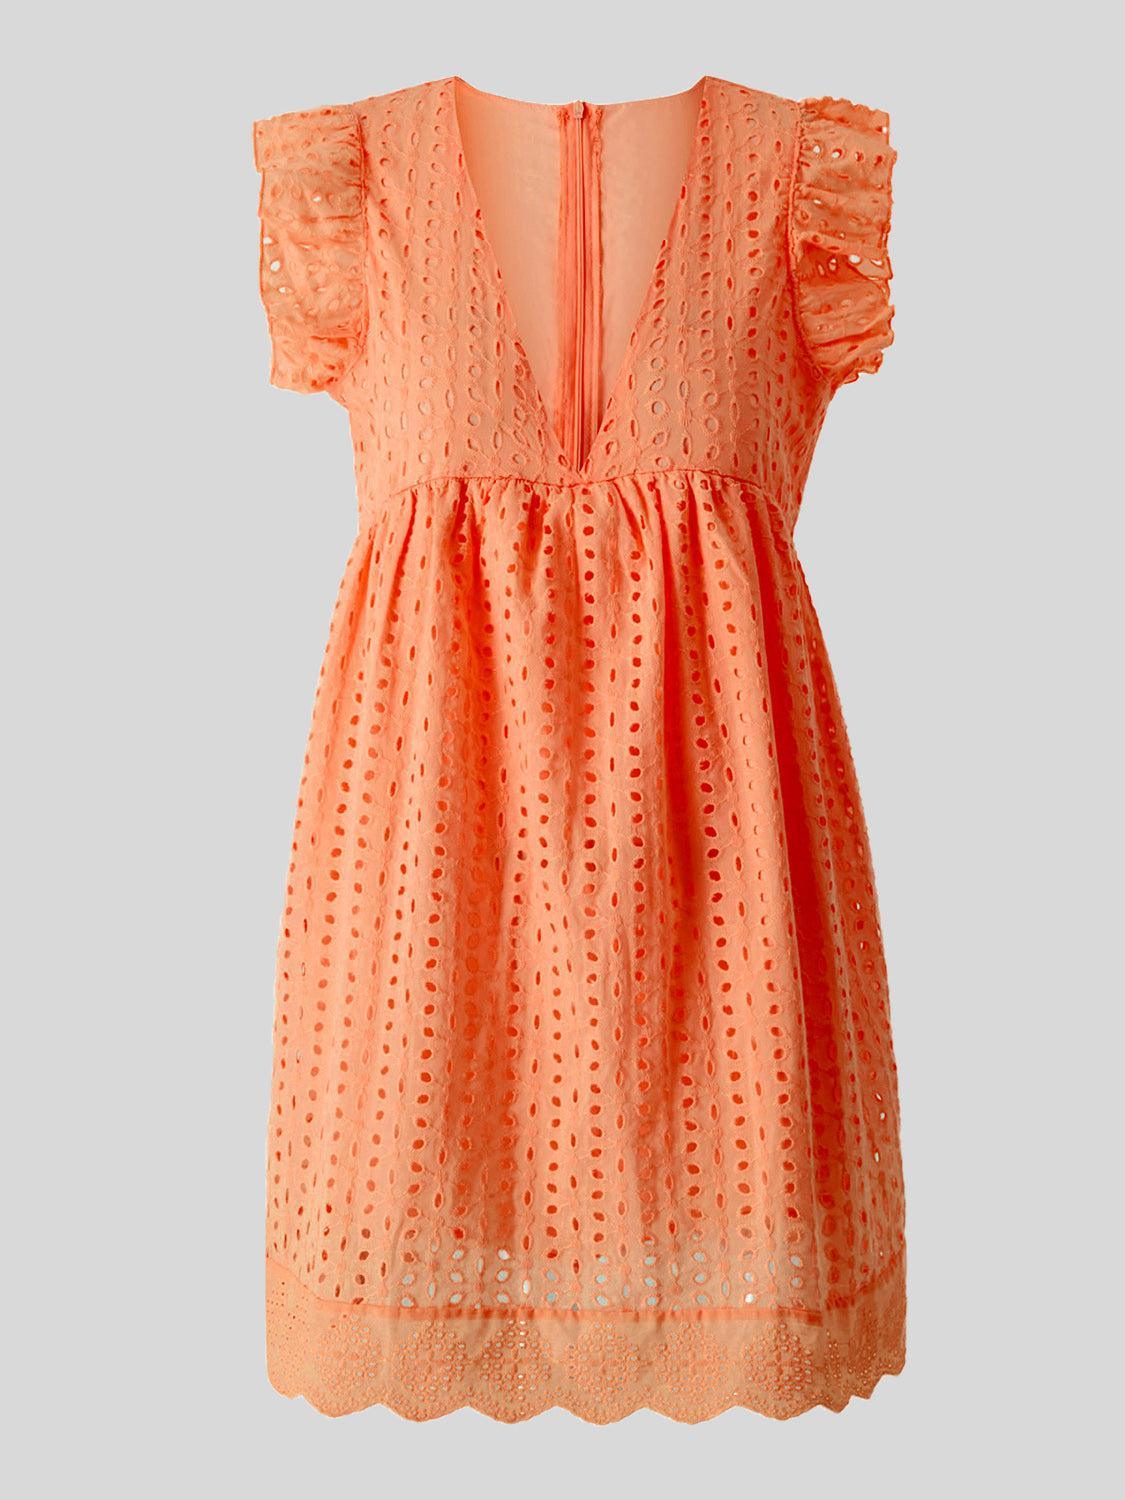 an orange dress with ruffles on the shoulders